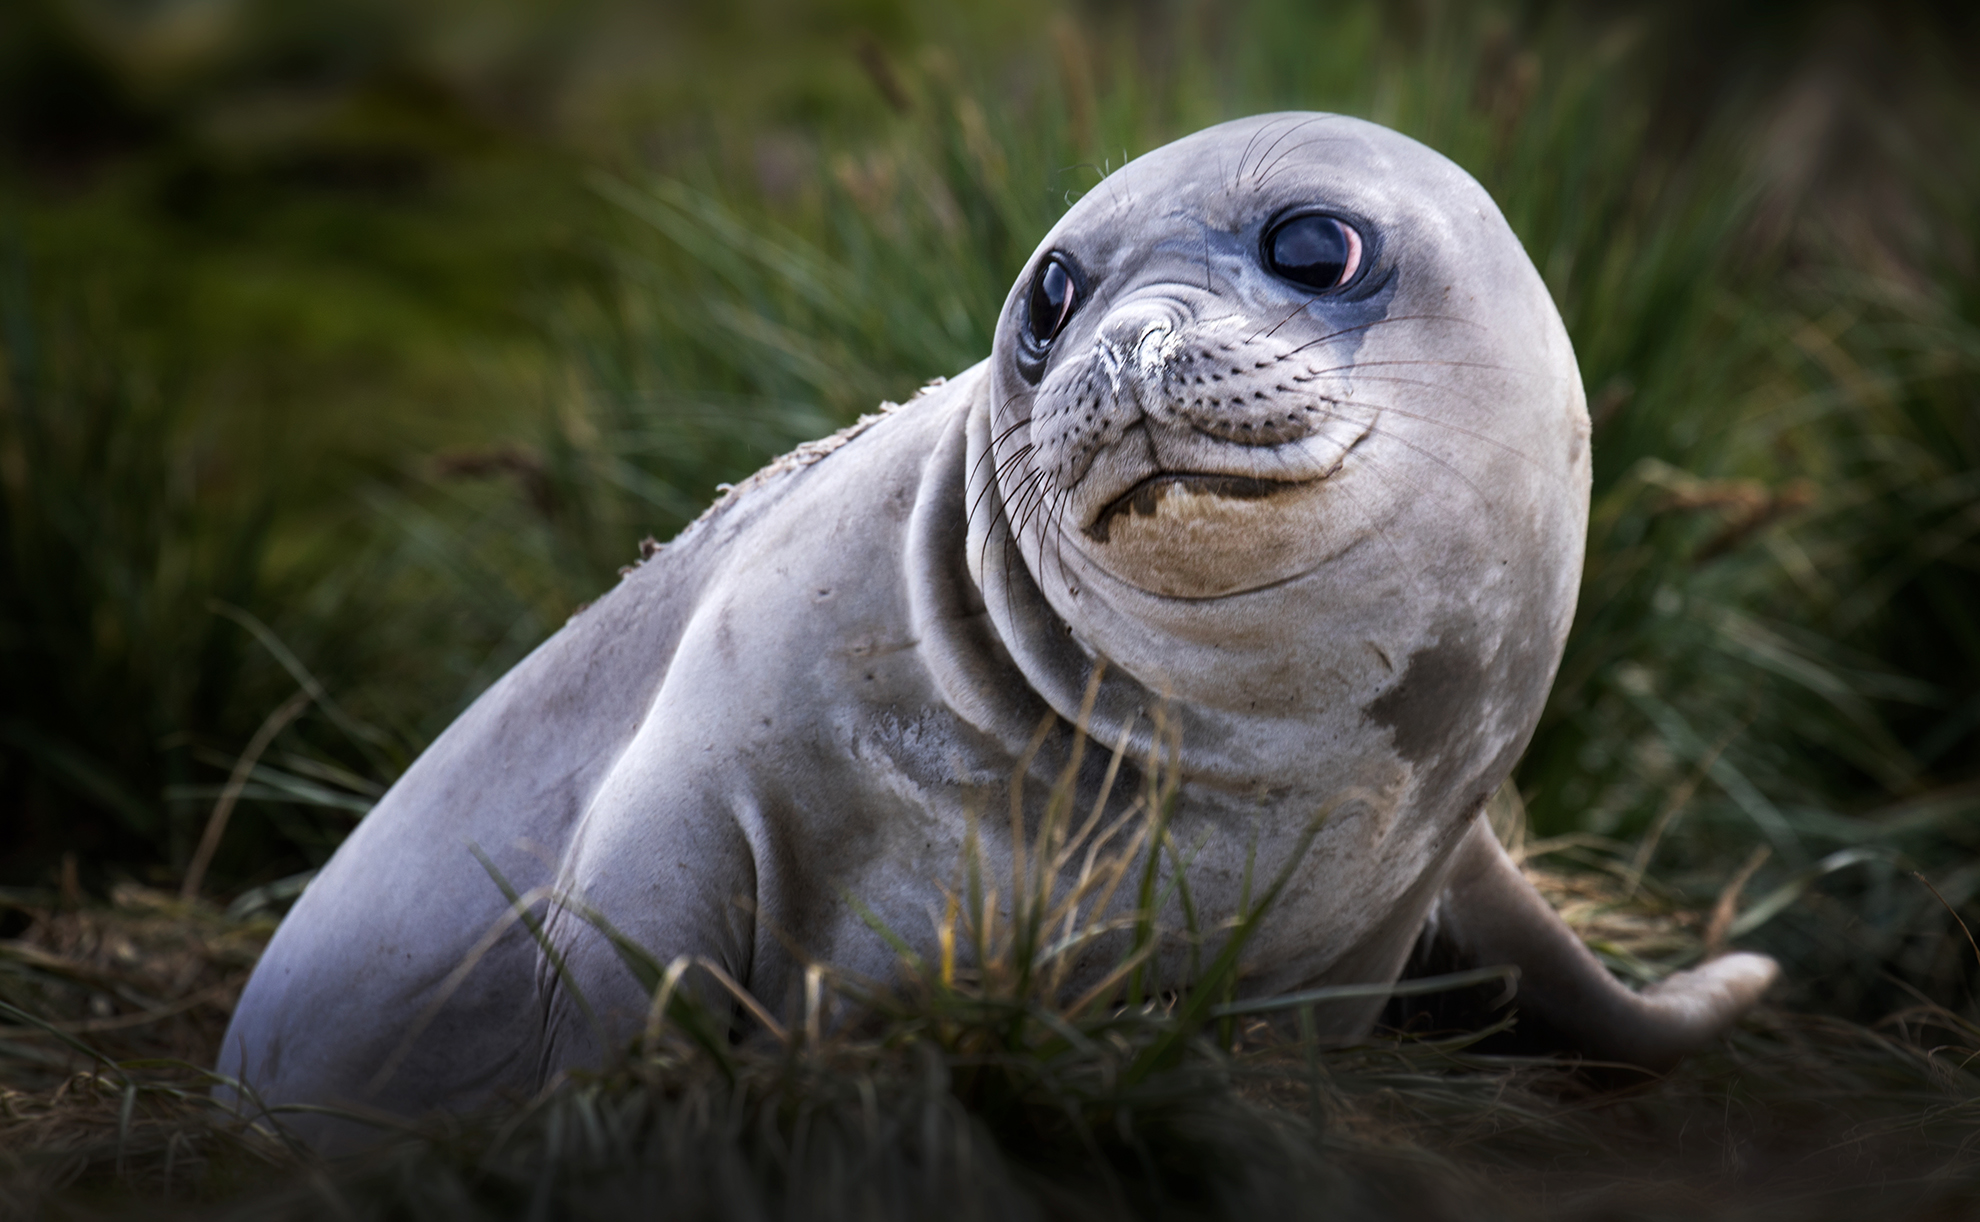 Image of a seal pup in the grass